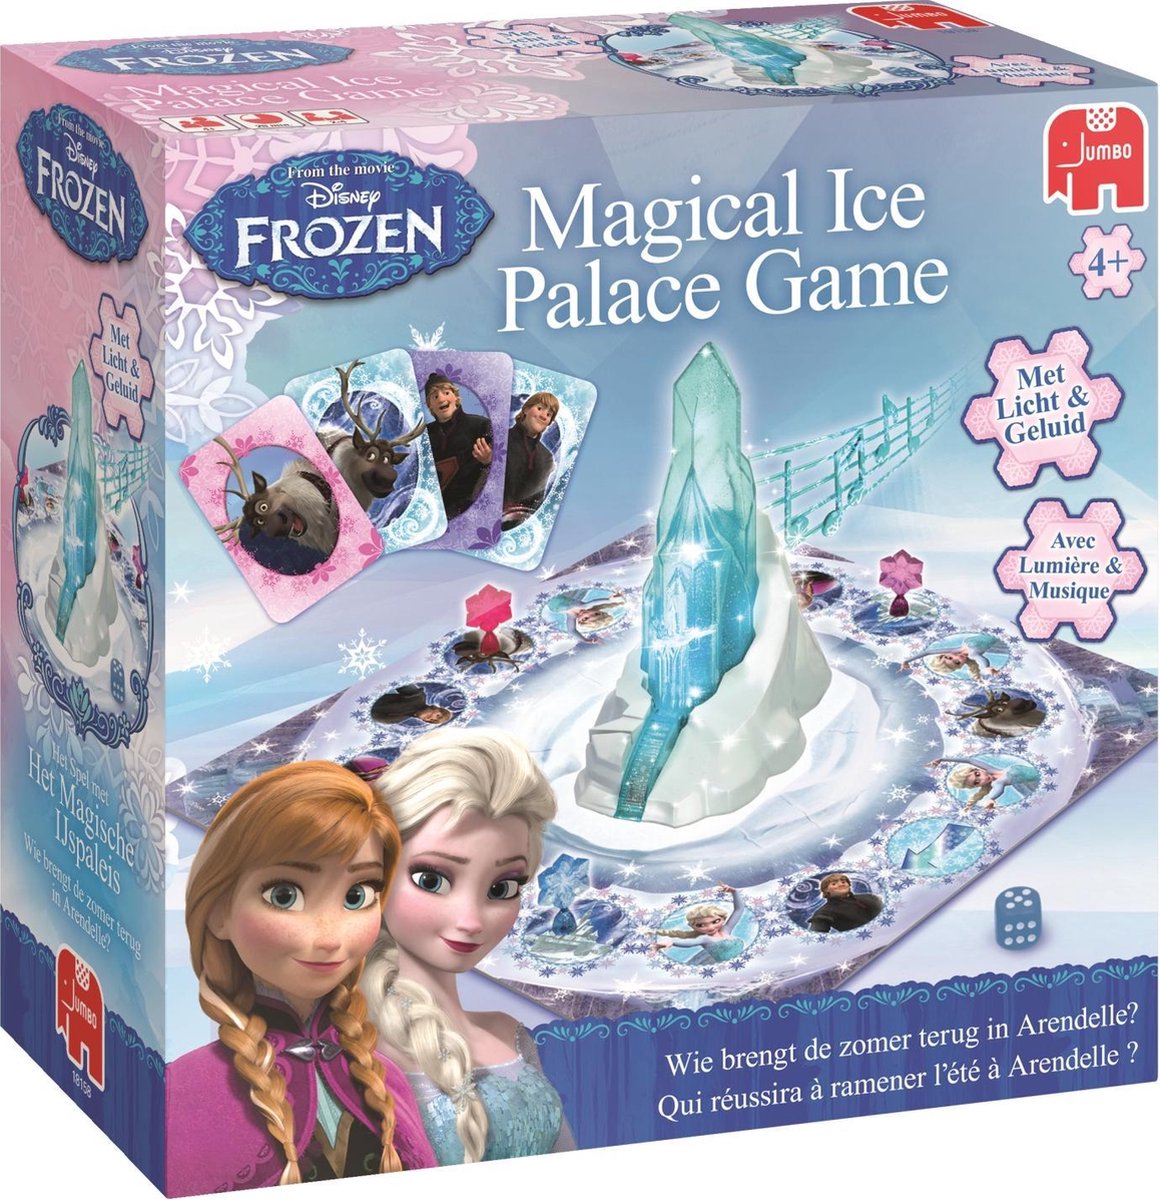 kom tot rust thee Afdeling Frozen Magical Ice Palace - Kinderspel | Games | bol.com